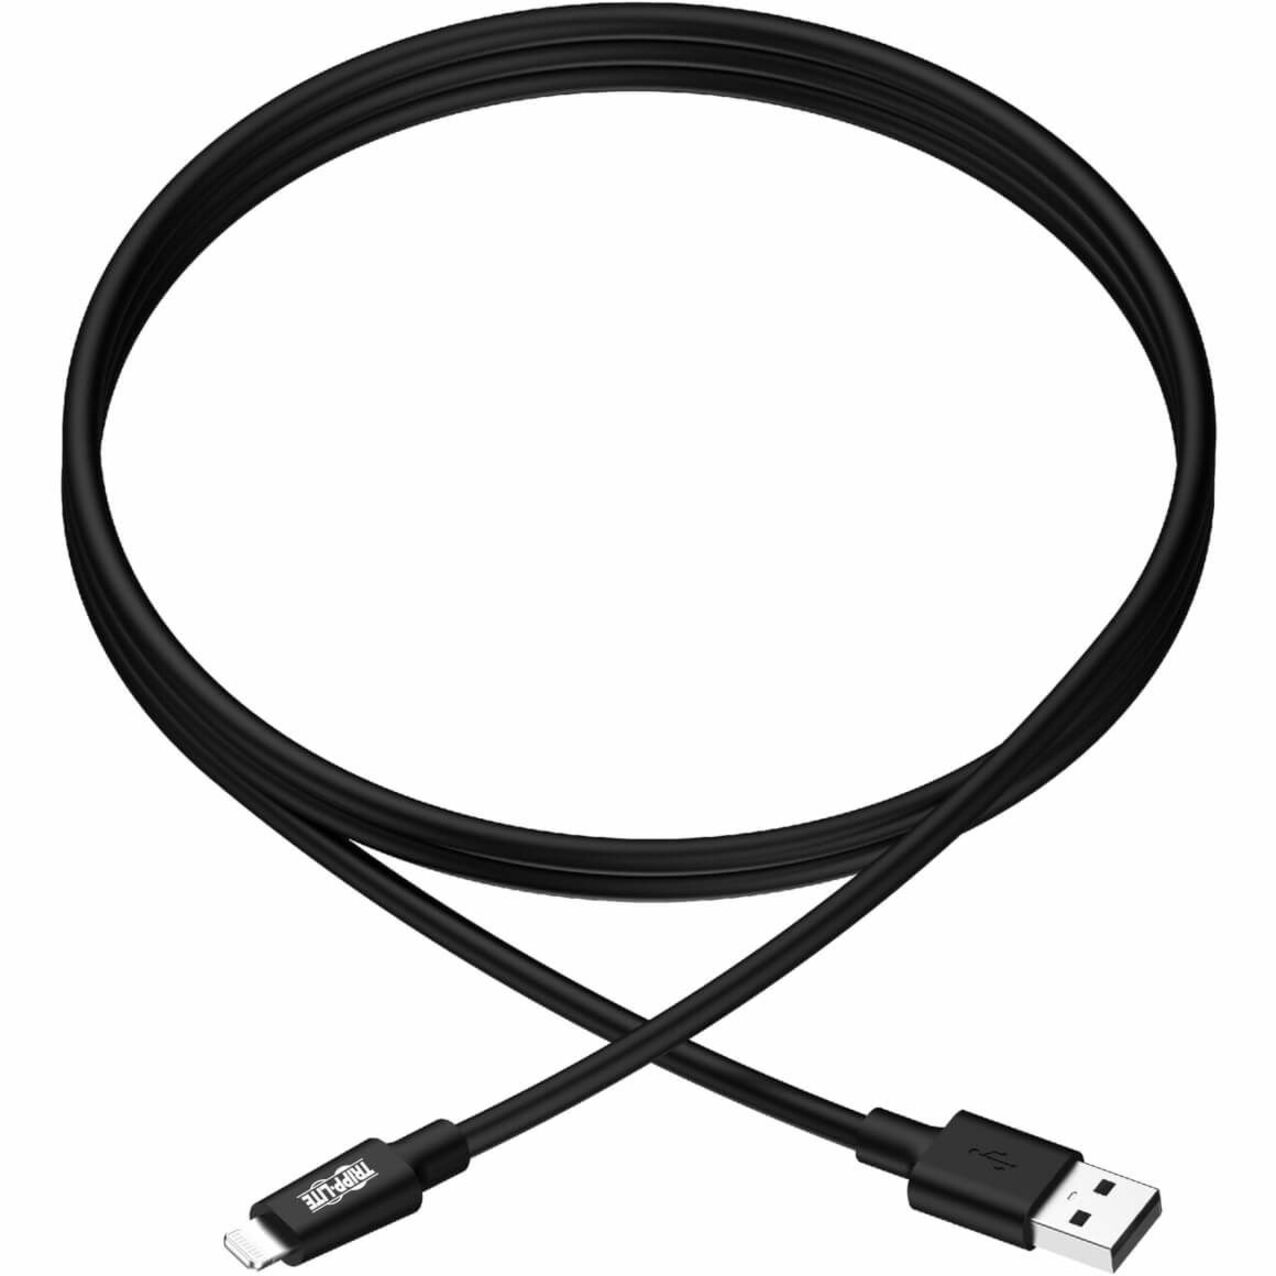 Tripp Lite M100-010-BK USB Sync/Charge Cable with Lightning Connector, Black, 10 ft. (3 m)